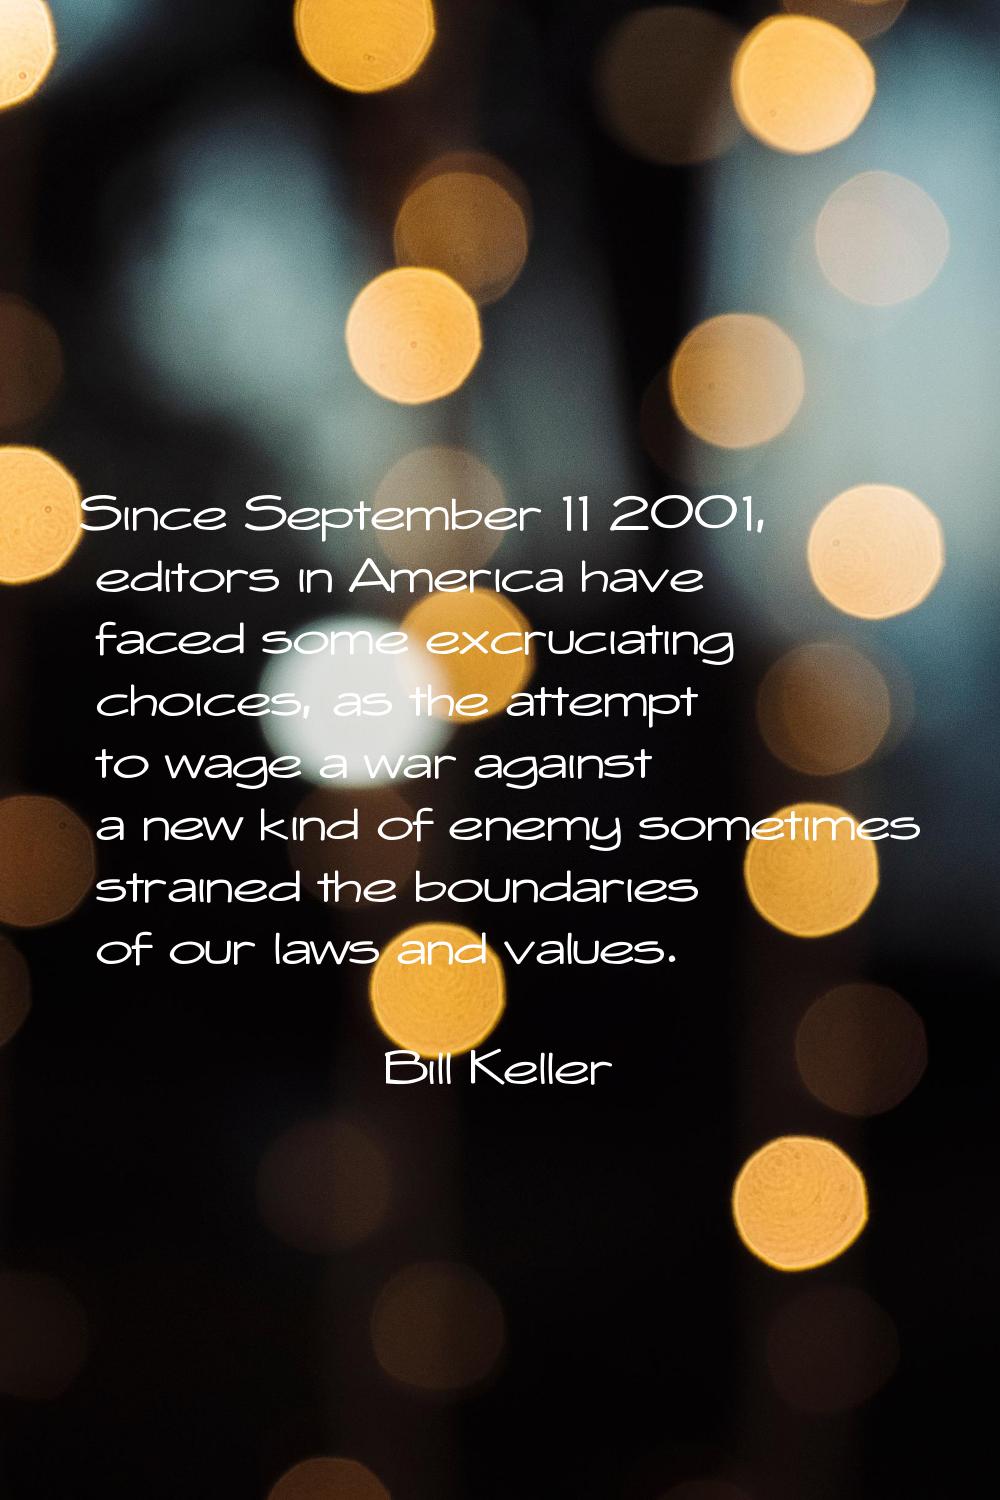 Since September 11 2001, editors in America have faced some excruciating choices, as the attempt to